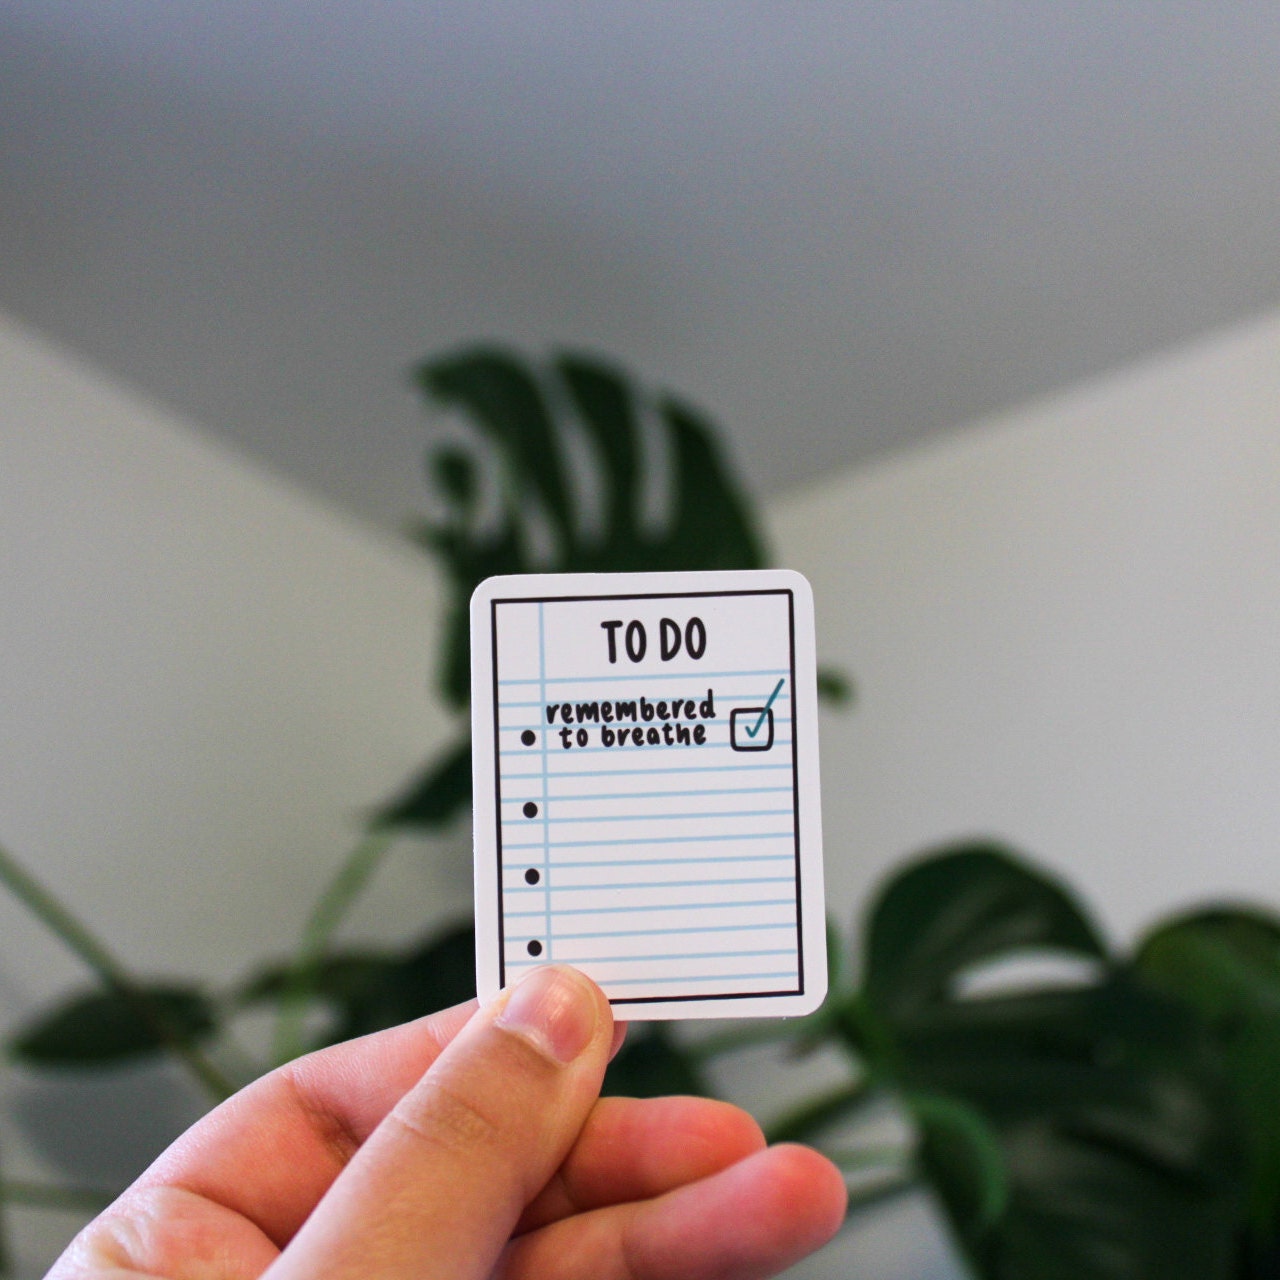 to do: remembered to breathe | sticker